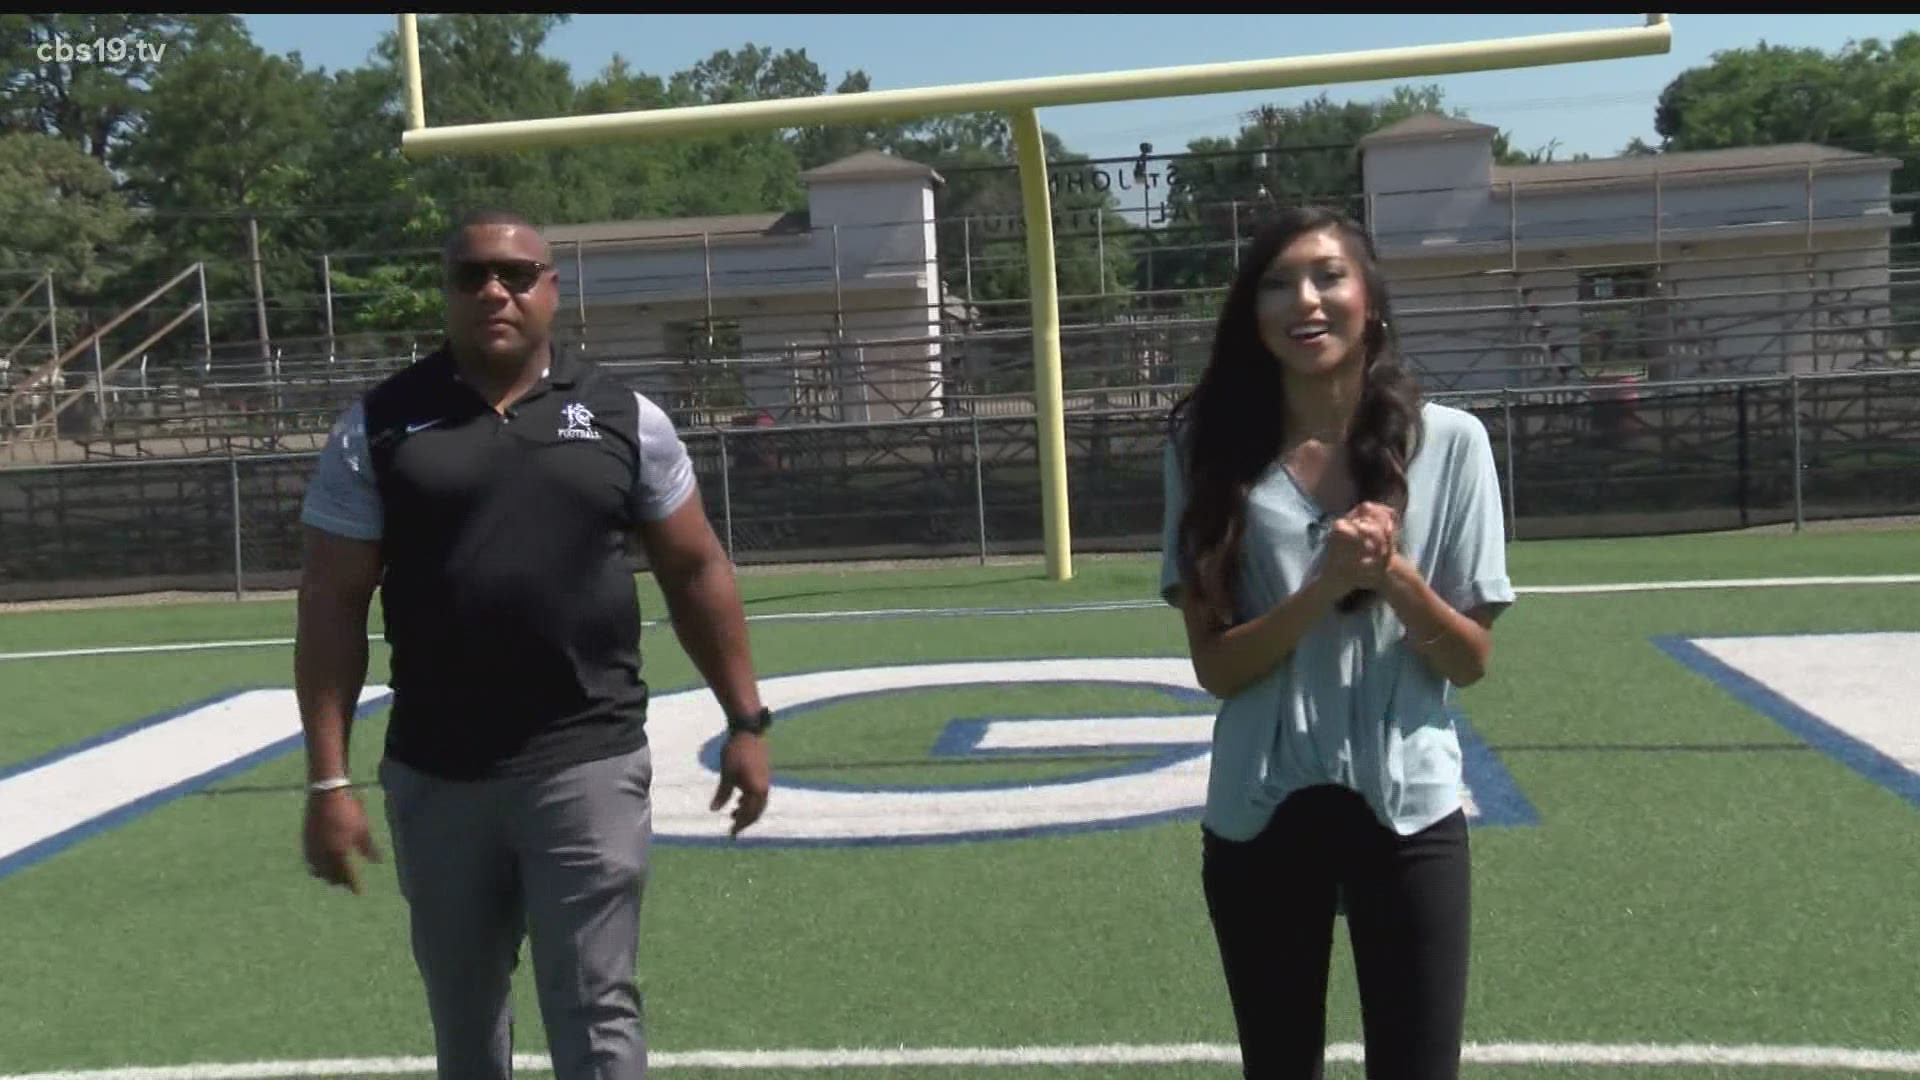 Get to know Kilgore College head football coach Willie Gooden more in another edition of 100-Yards with Tina Nguyen.